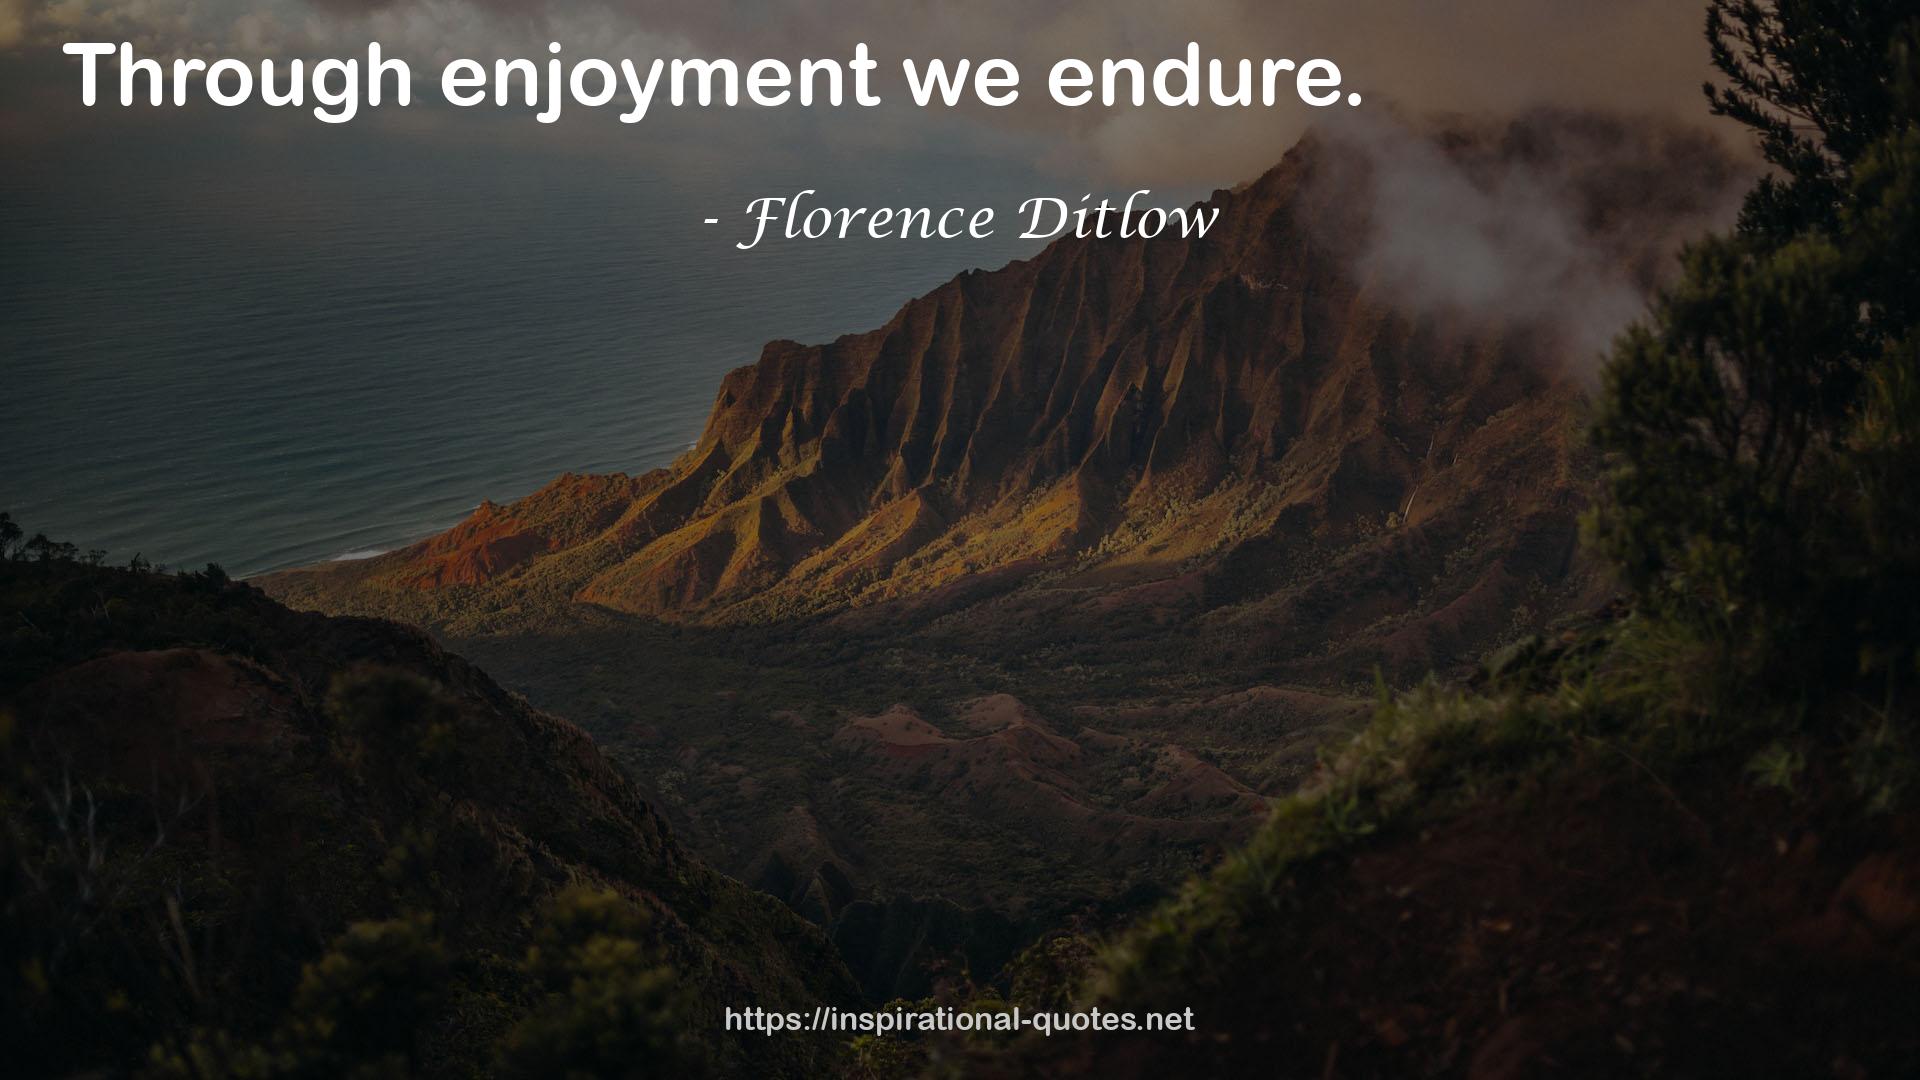 Florence Ditlow QUOTES